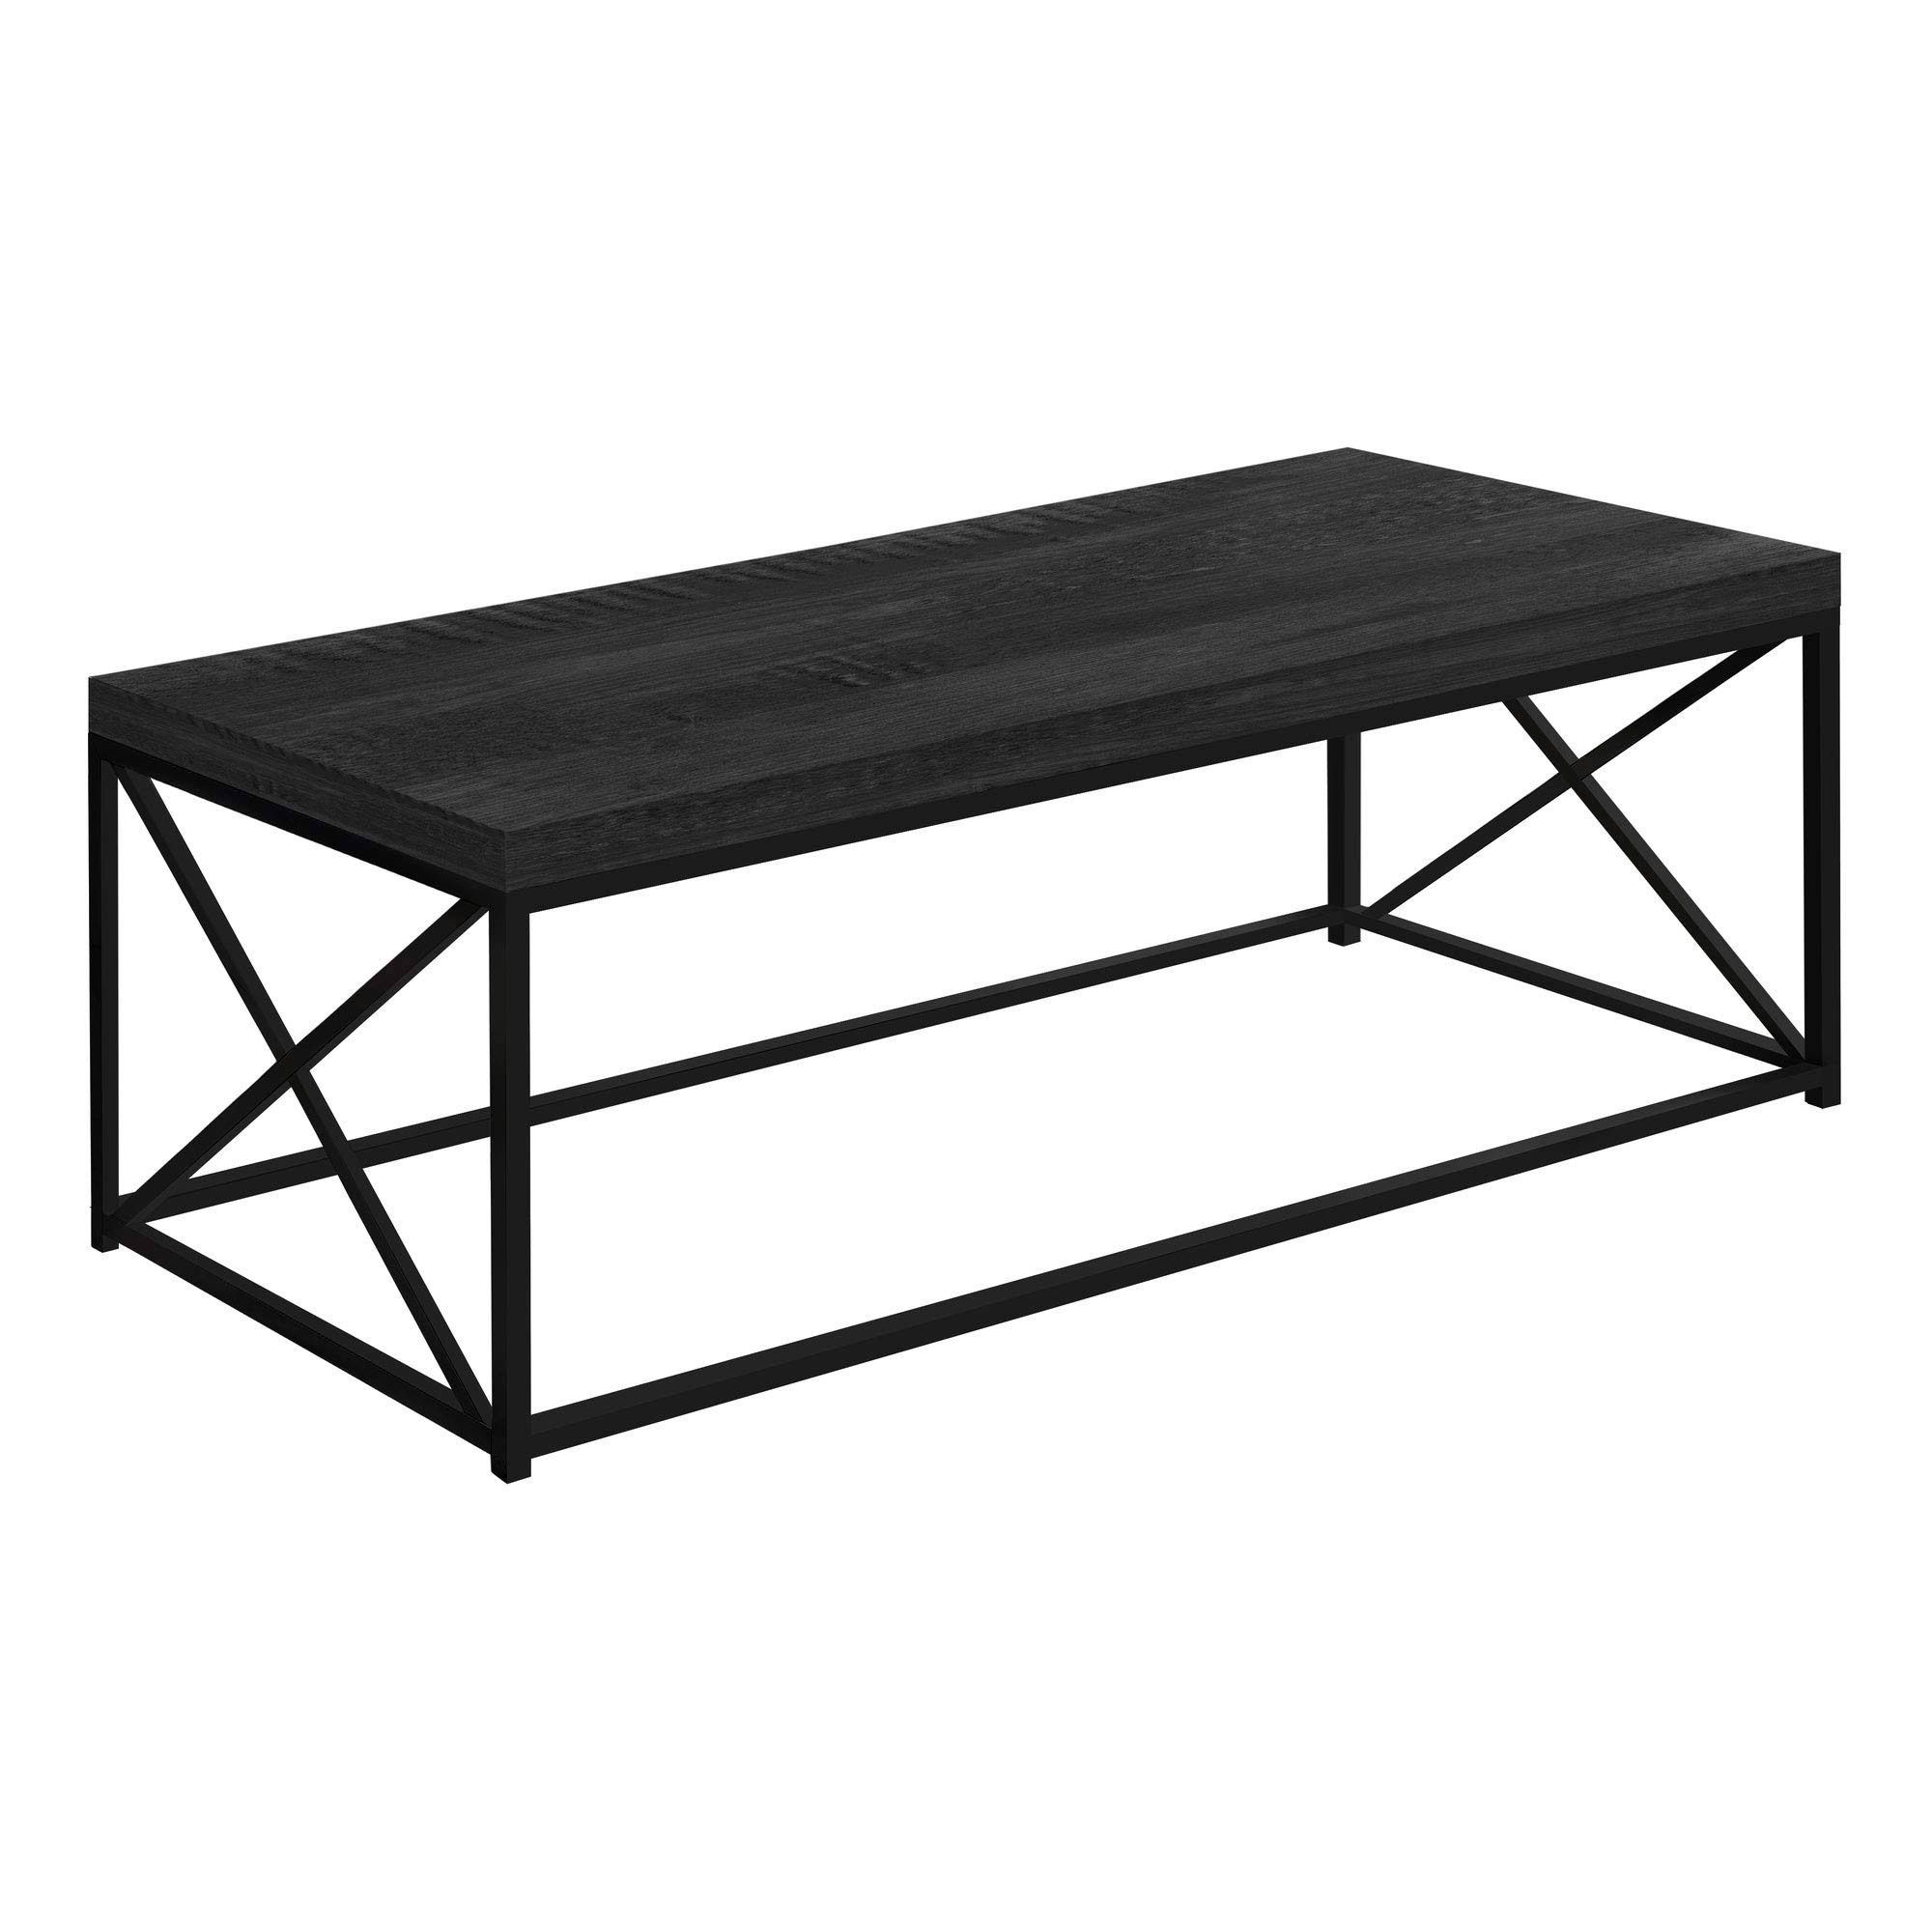 Monarch Black Wood Look Finish Black Metal Decor Contemporary Style Inside Studio 350 Black Metal Coffee Tables (View 20 of 20)